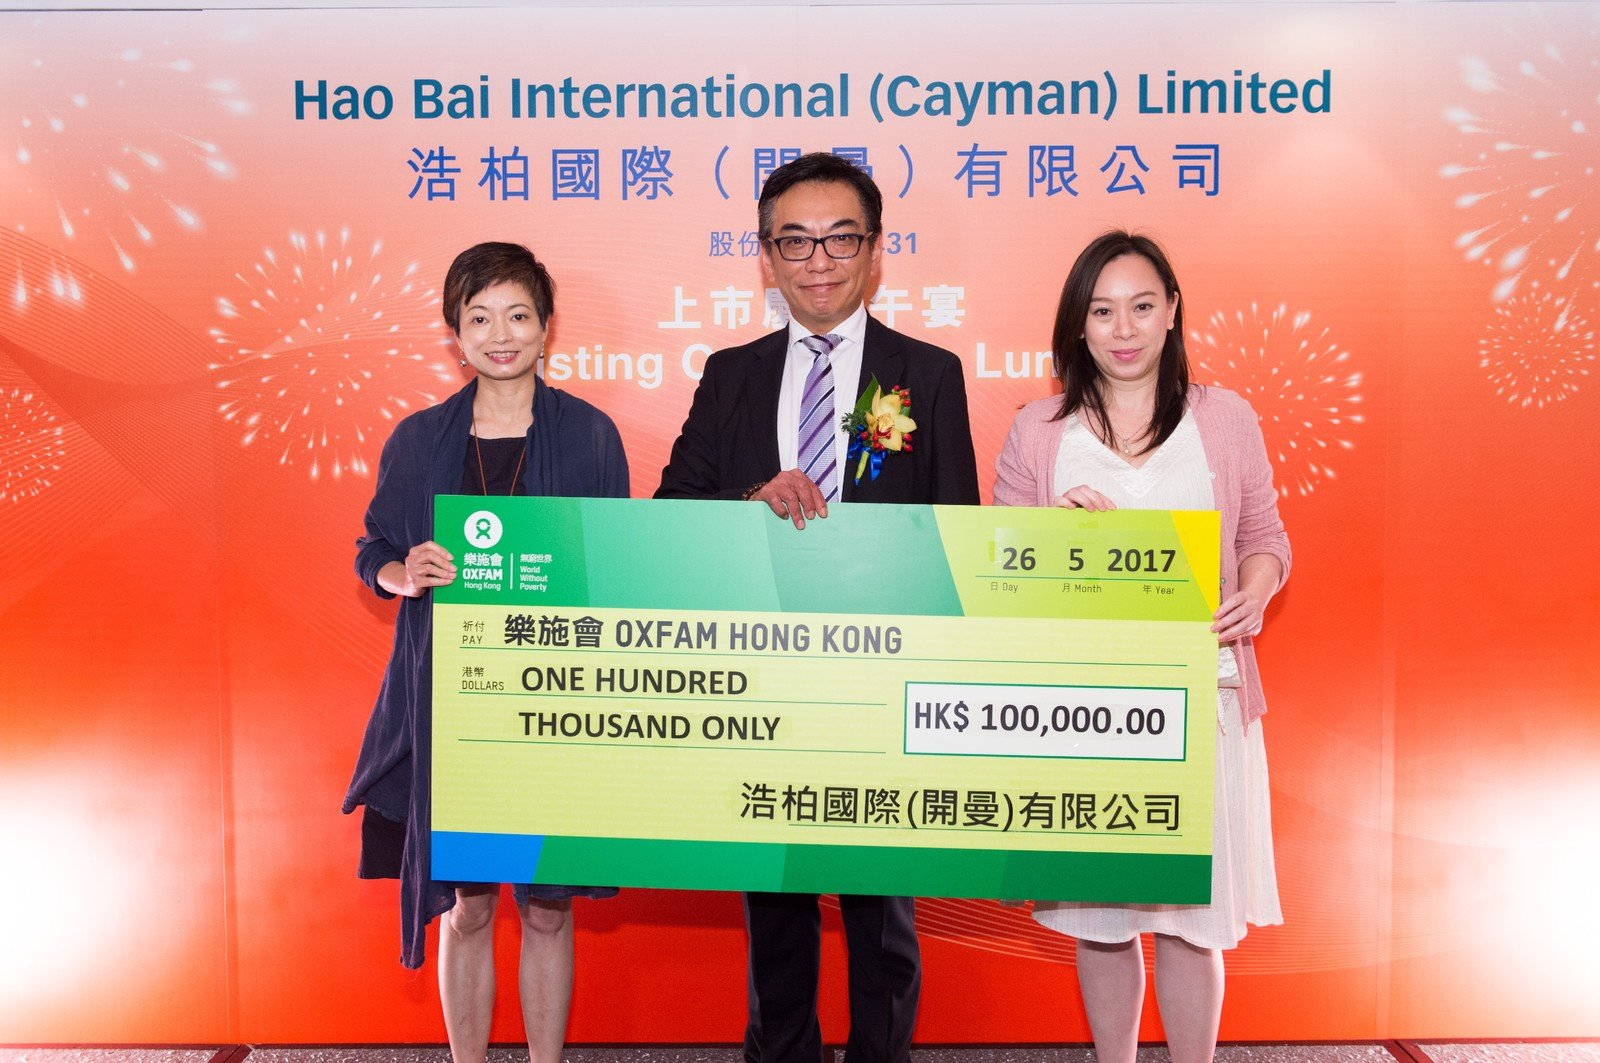 Hao Bai International (Cayman) Limited was publicly listed on the Growth Enterprise Market on 26 May 2017. To mark this occasion, the company donated HK$100,000 to support Oxfam’s anti-poverty work.